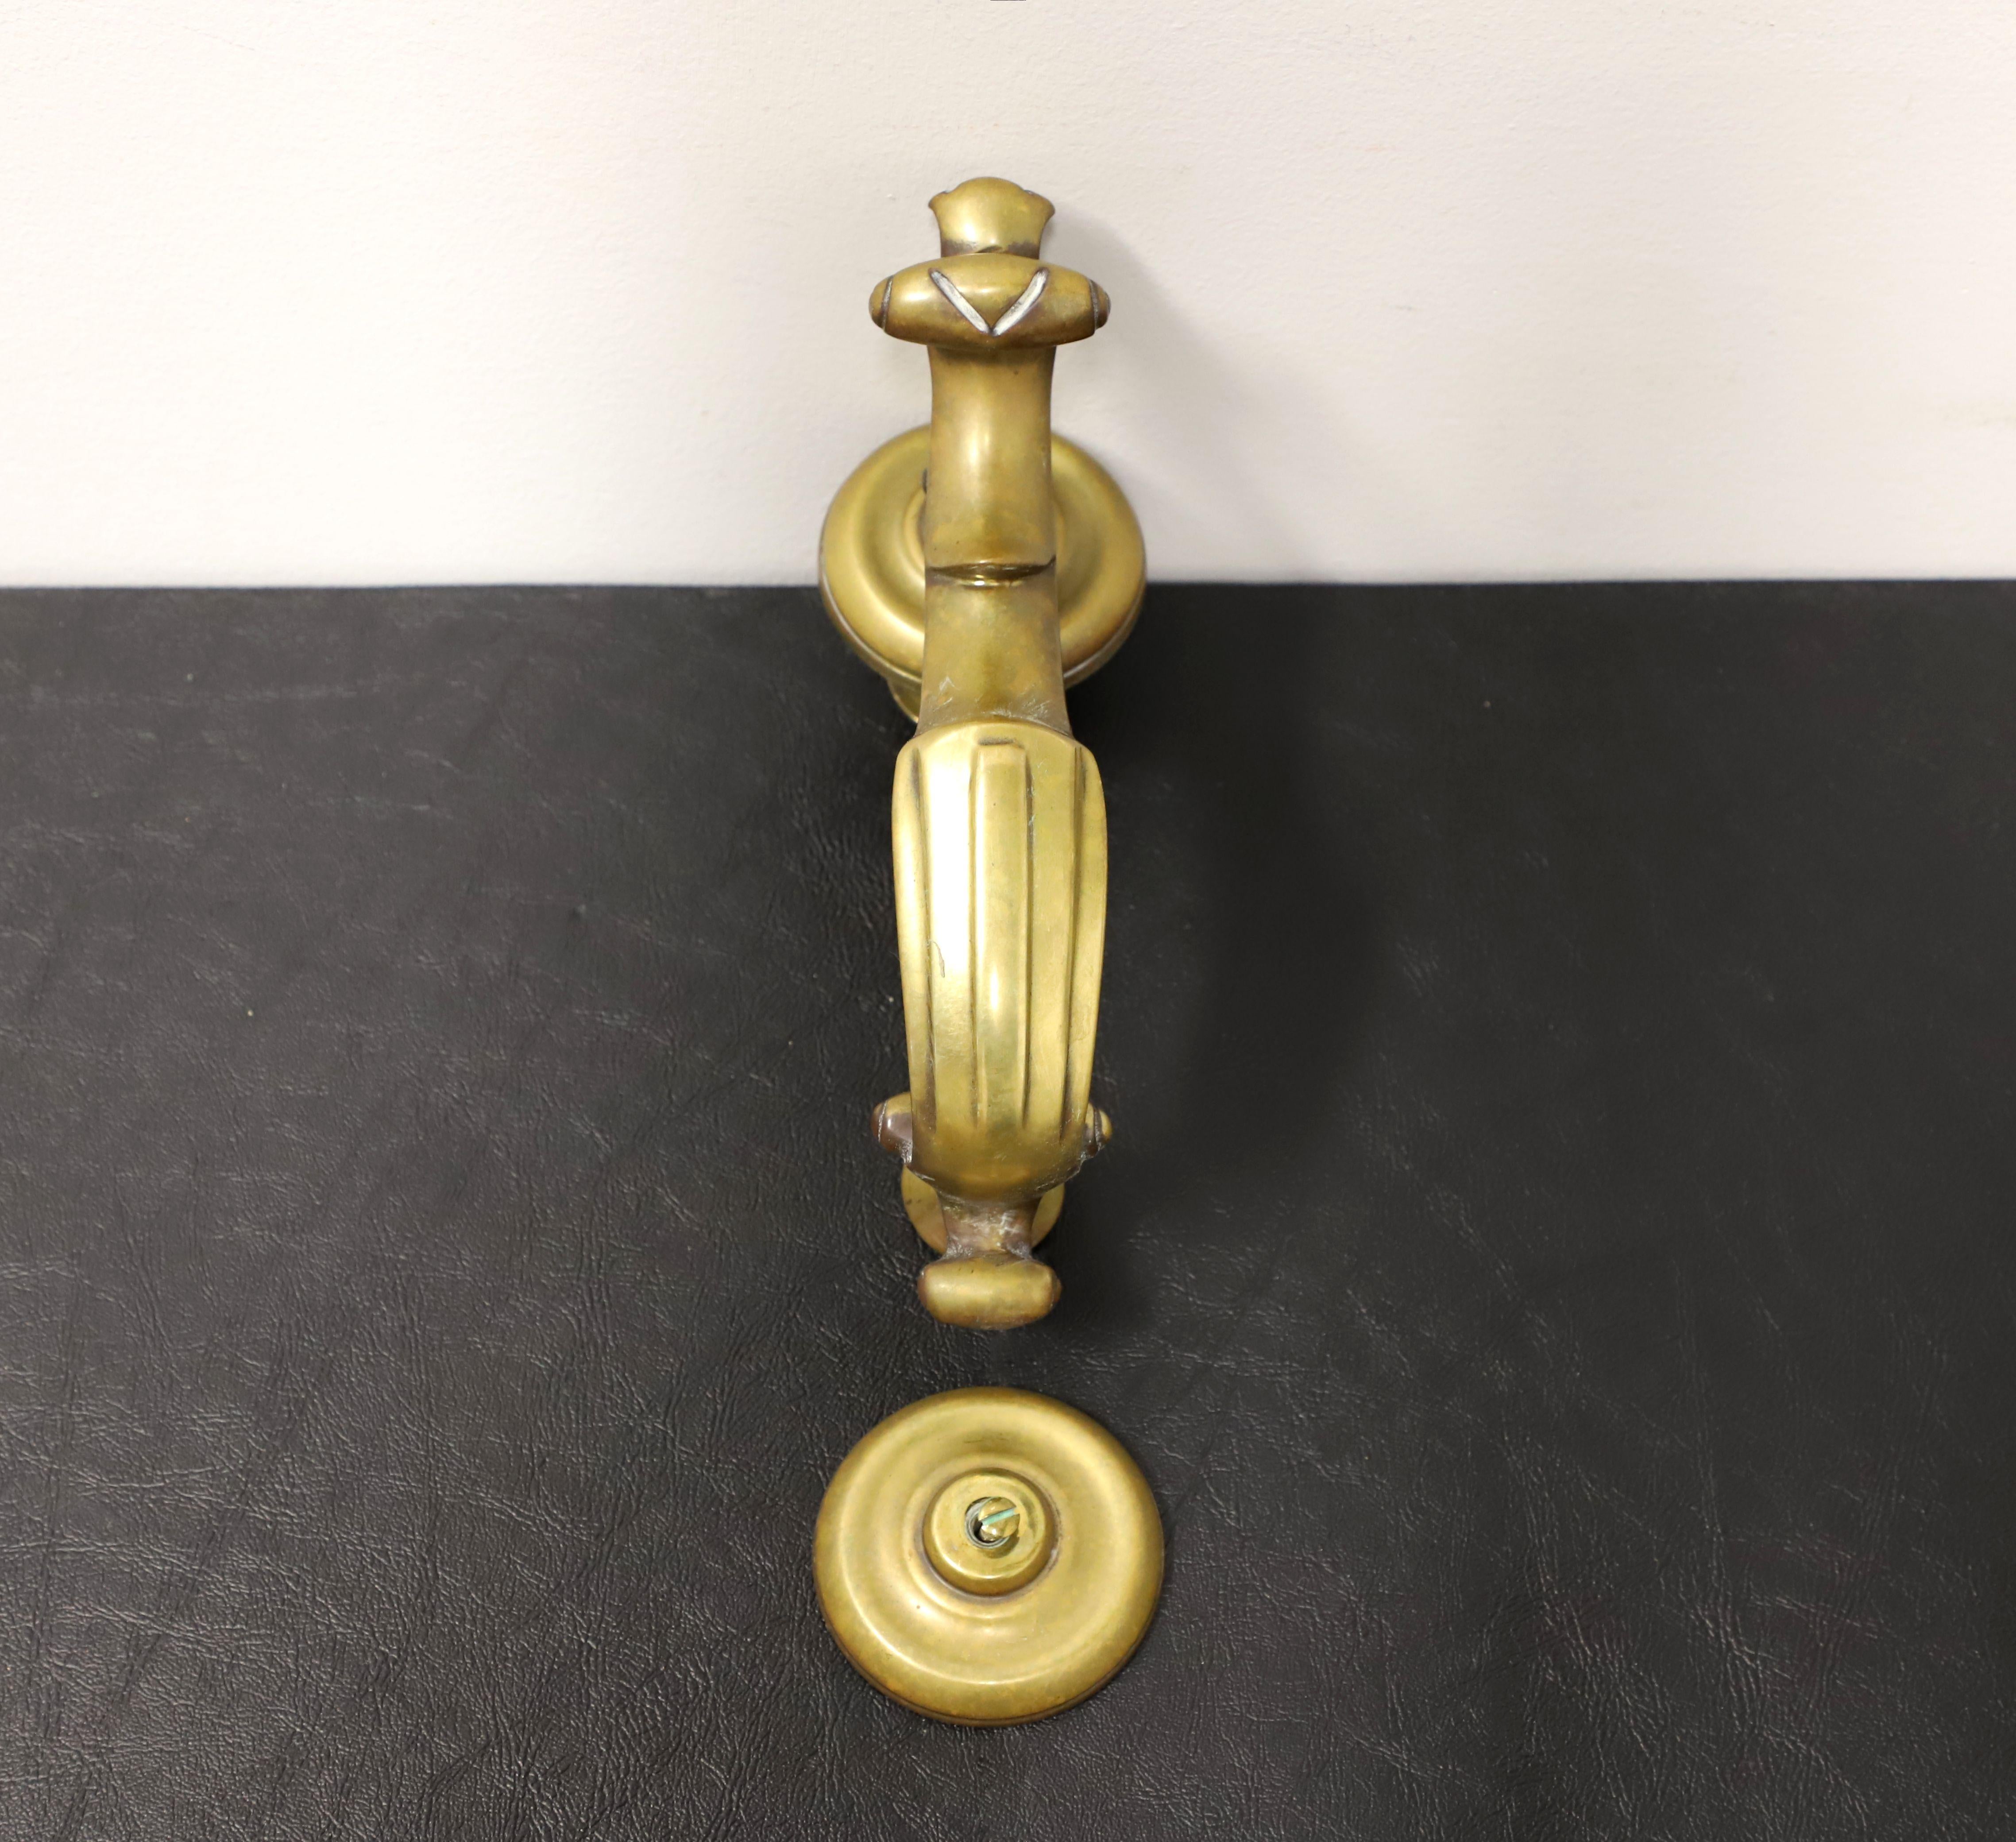 A door knocker and plate by Virginia Metalcrafters. Solid brass in a classic design. Includes bolt and screw for mounting to door for each piece. Made in Virginia, USA, in the late 20th Century.

Measures: Knocker:  2.75w 5.75d 8.5h, Plate: 2.75w